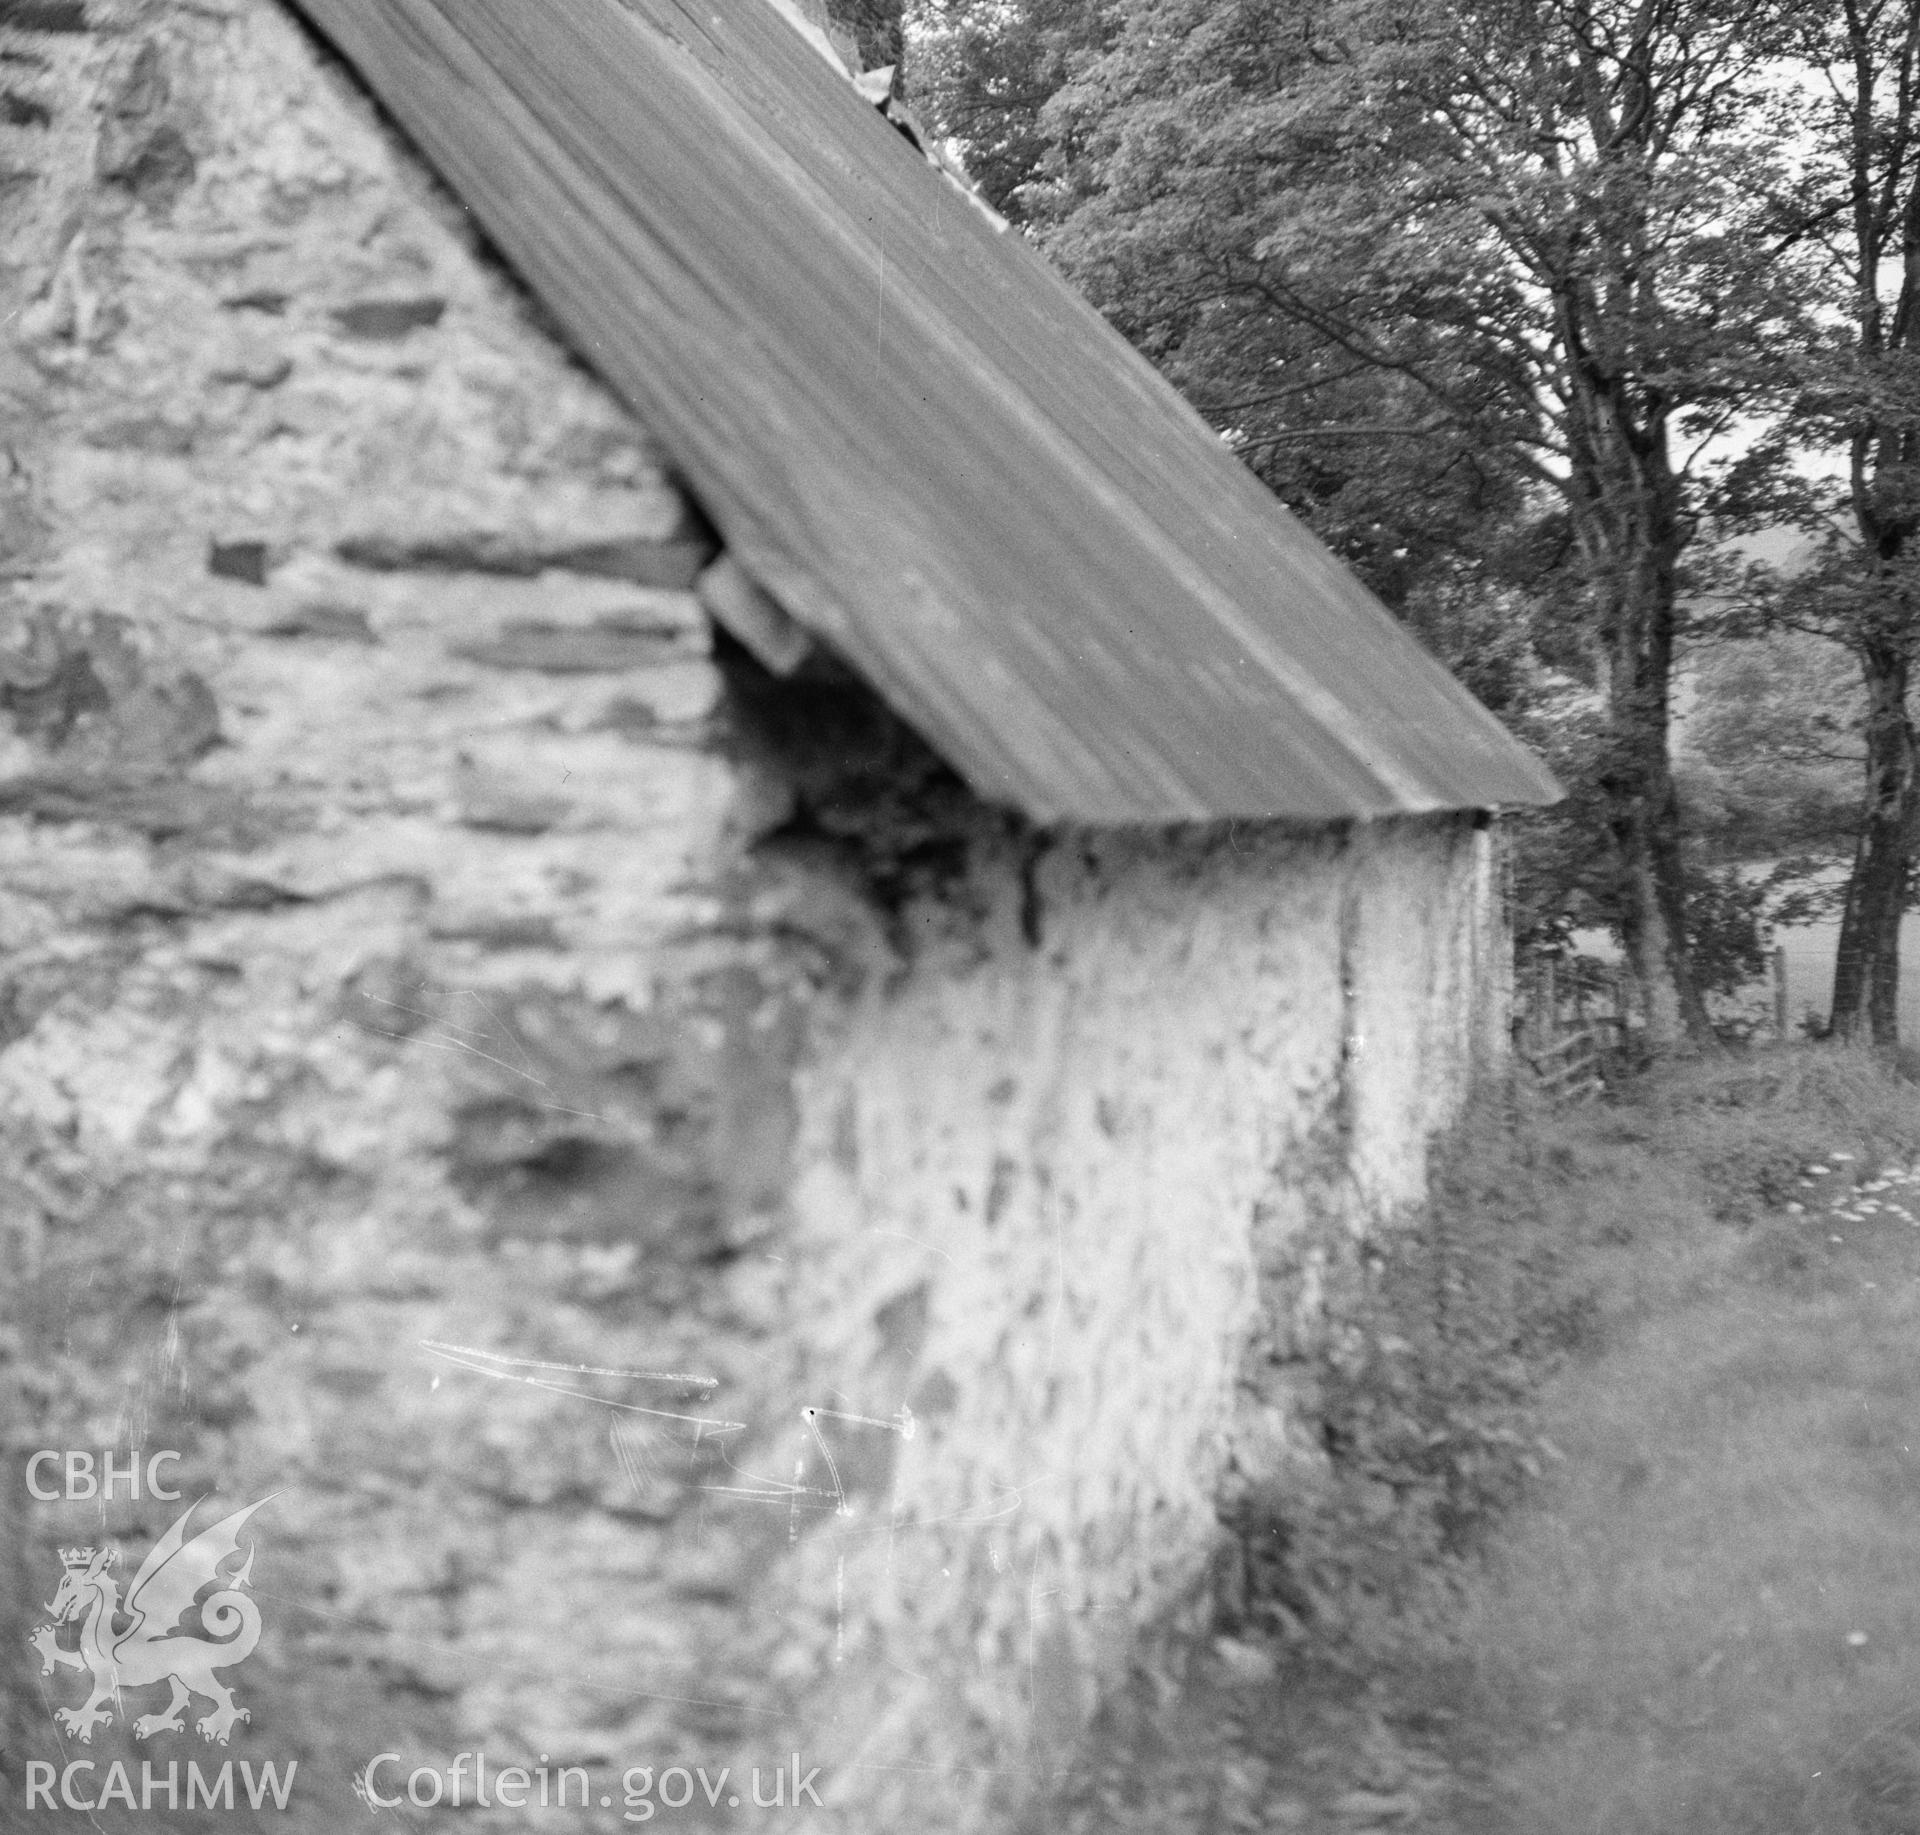 Digital copy of a black and white nitrate negative showing exterior view of Erw Domi, Porth-y-Rhyd, Carmarthenshire